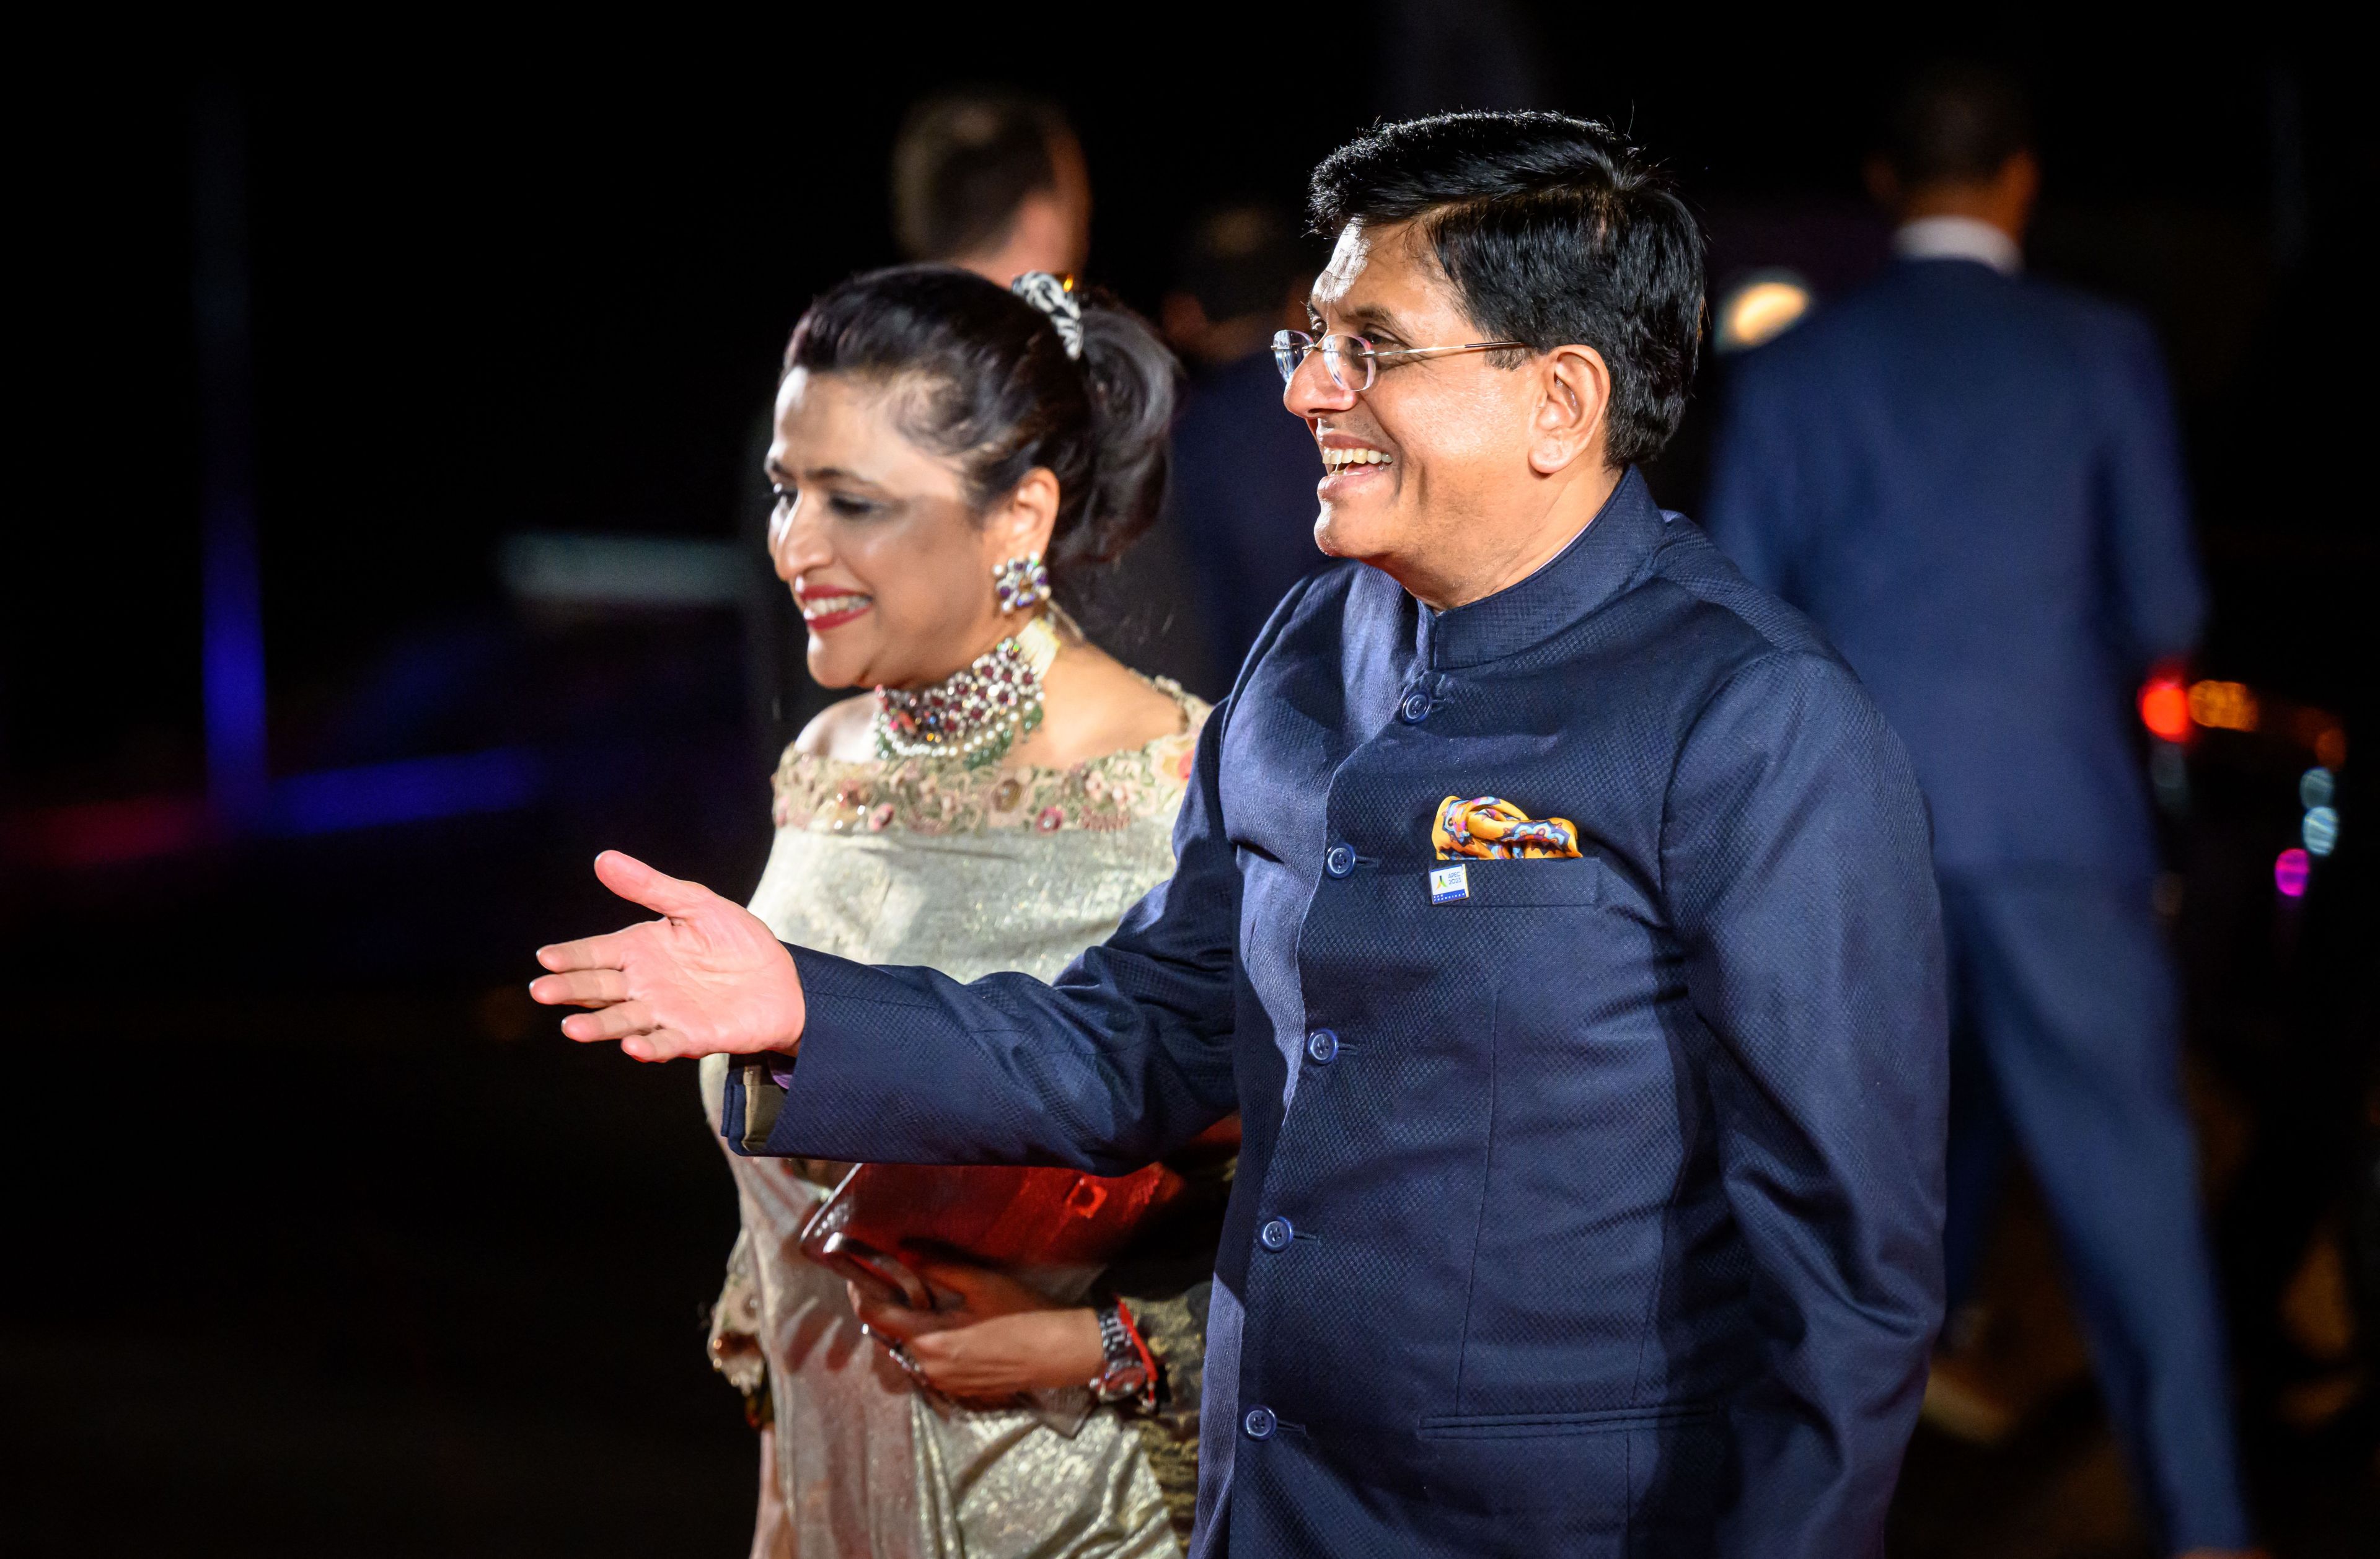 India's Minister of Textiles, Minister of Commerce and Industry Piyush Goyal smiles while extending his hand to greet someone off screen while and his spouse Seema Goyal by his side.